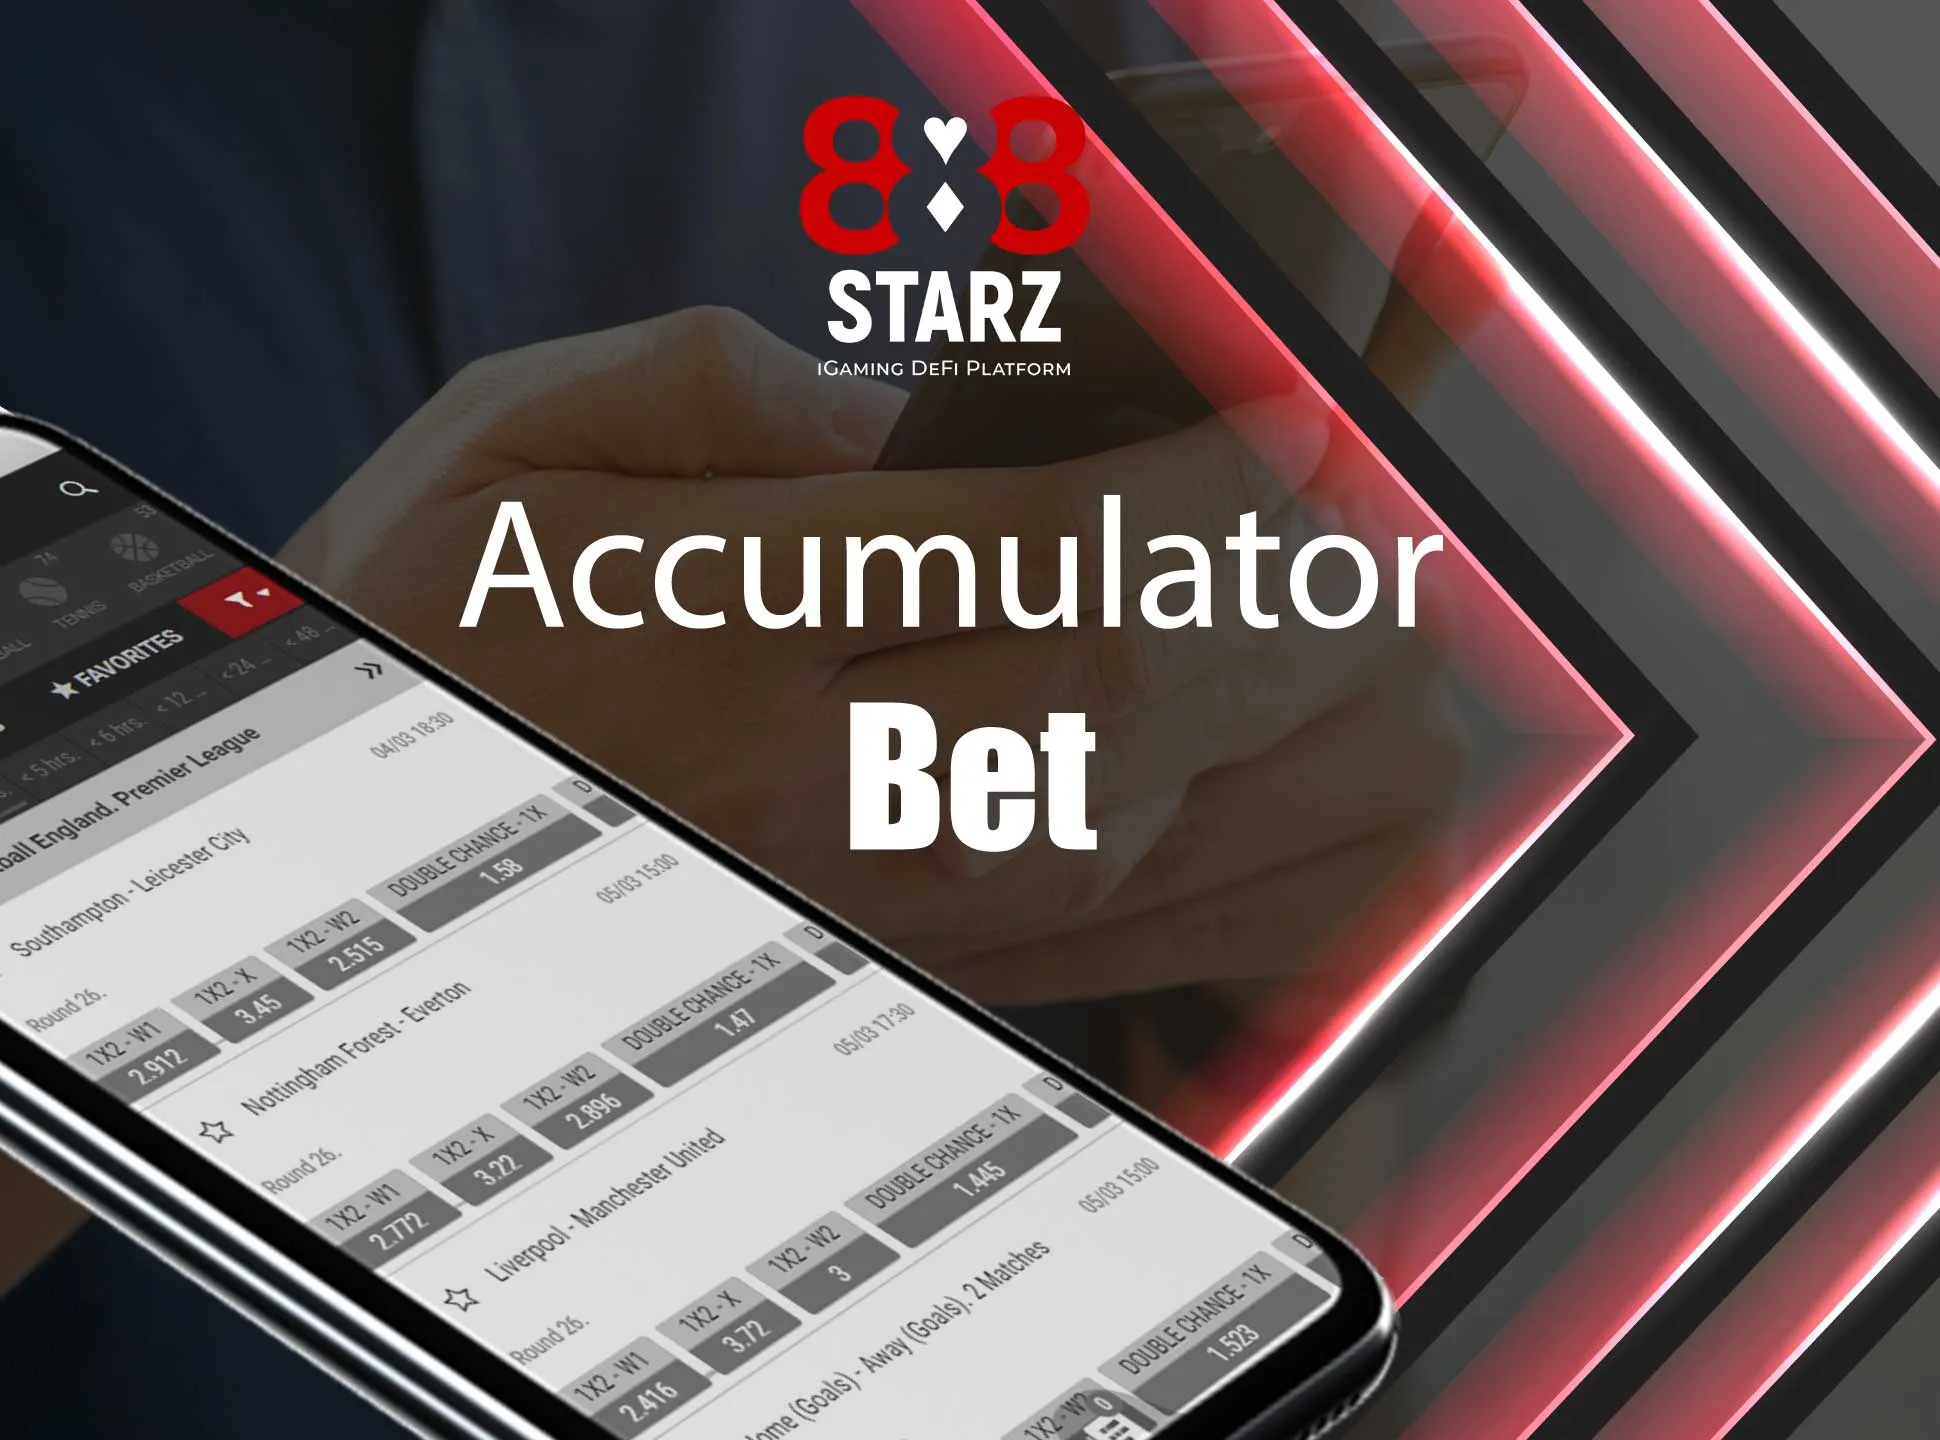 Accumulaotr bets allow you mix different bets and win more.